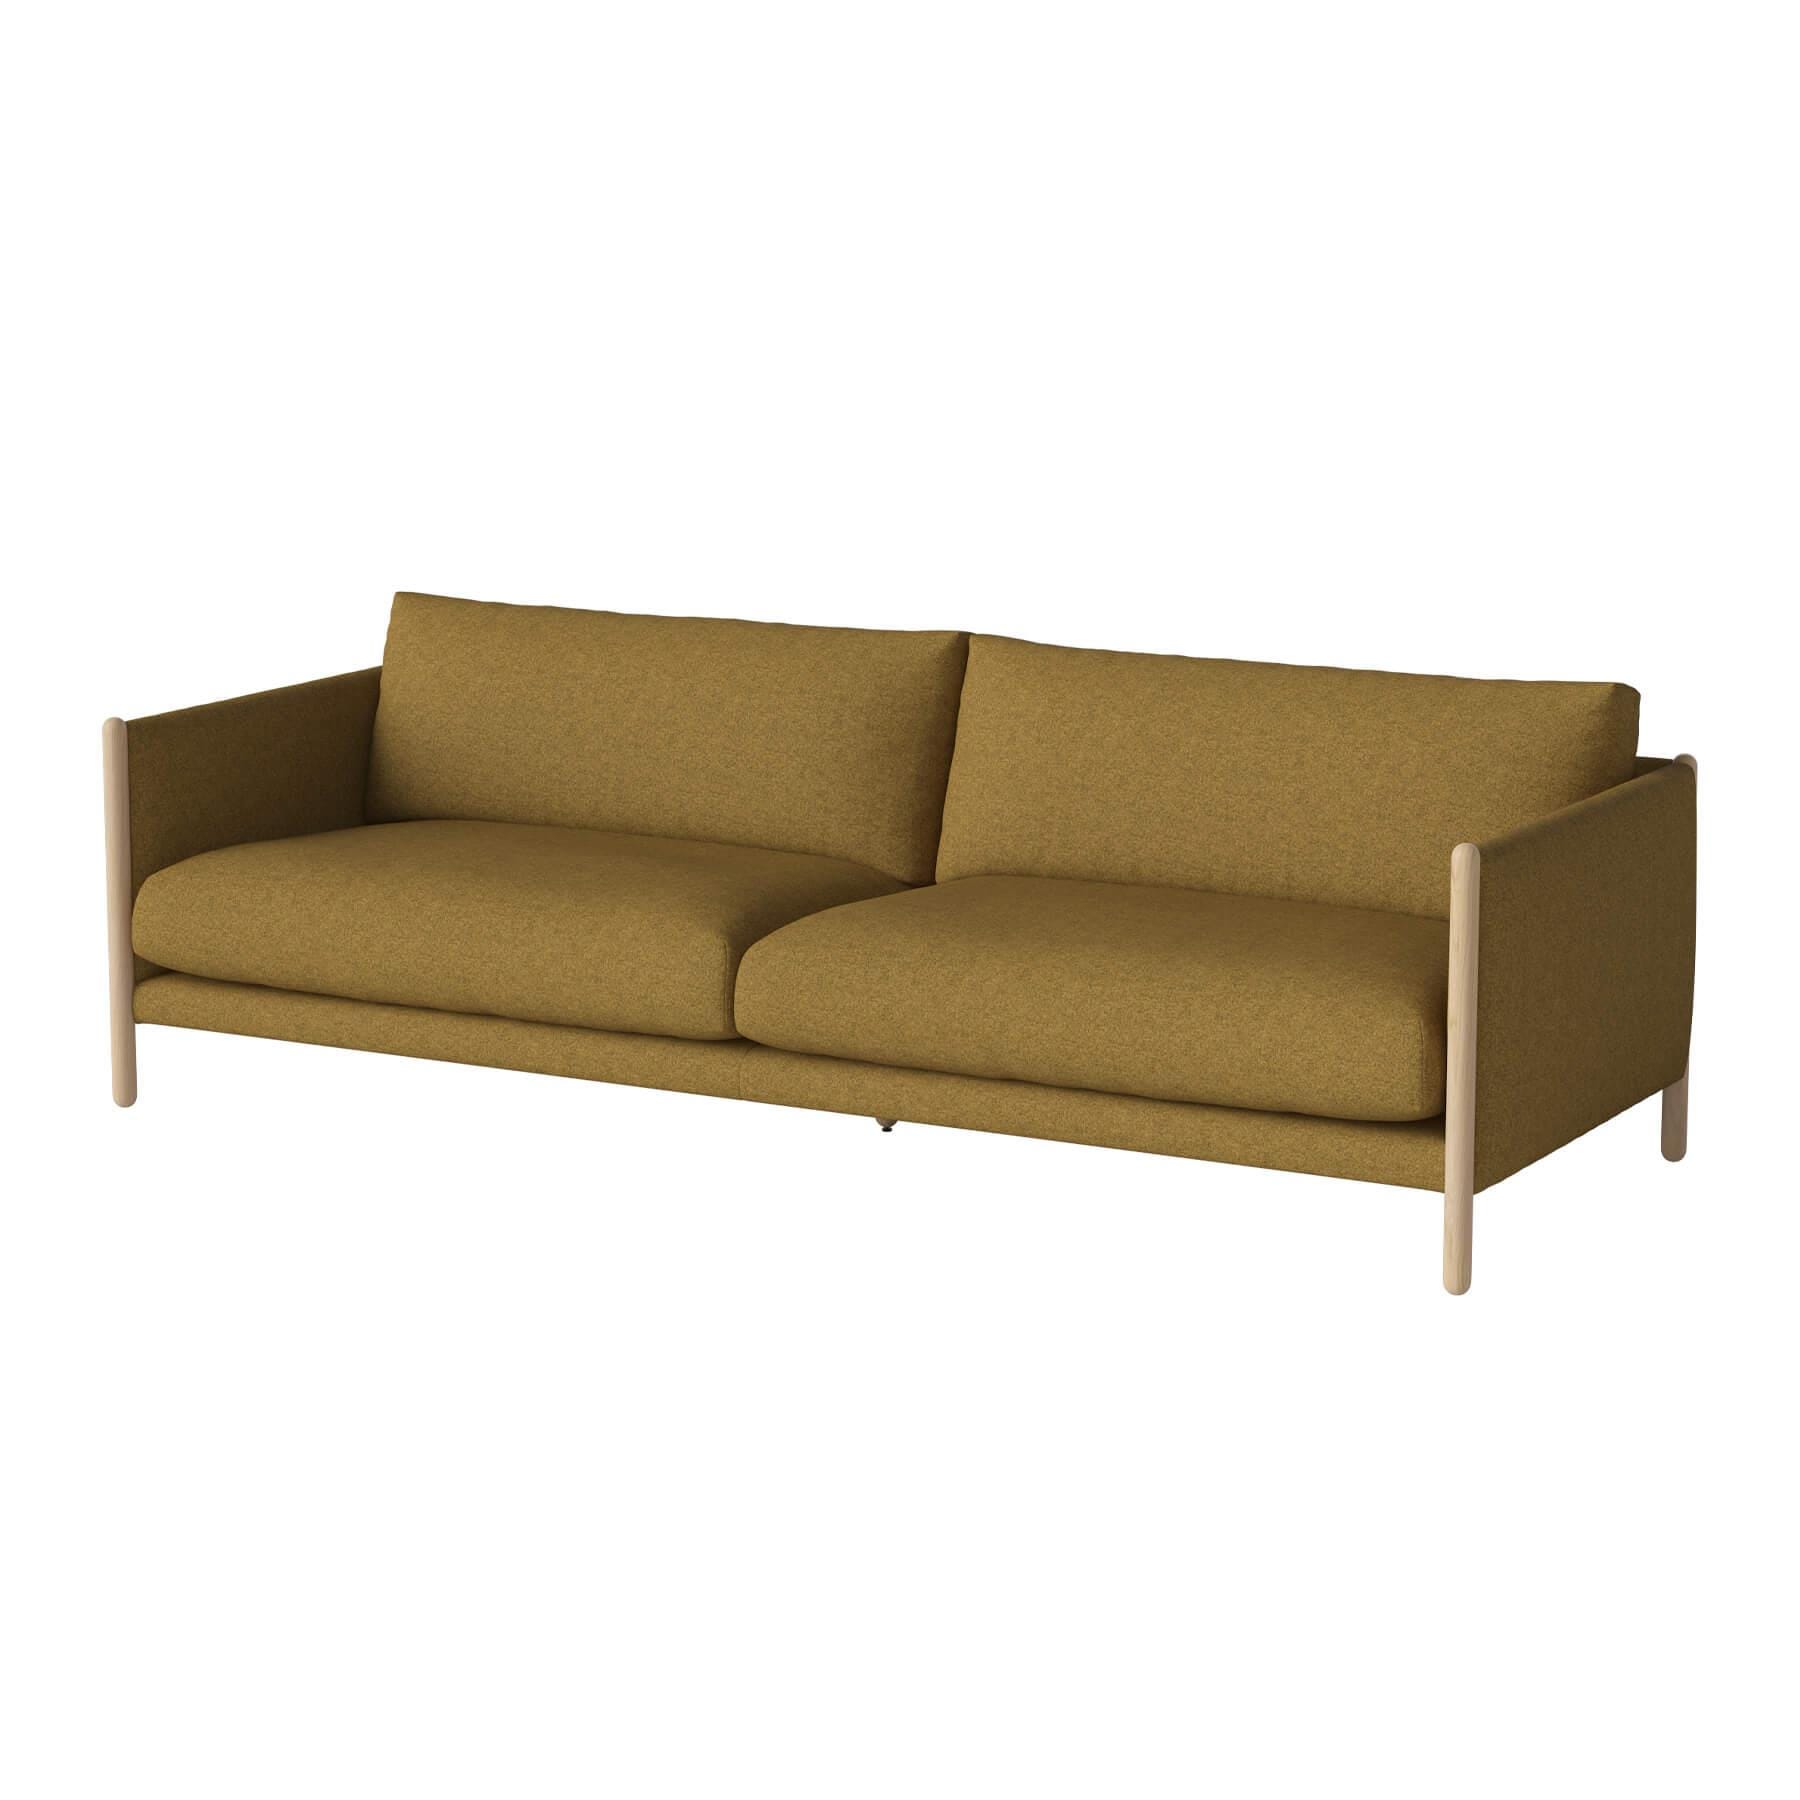 Bolia Hayden Sofa 3 Seater Sofa White Oiled Oak Qual Curry Brown Designer Furniture From Holloways Of Ludlow